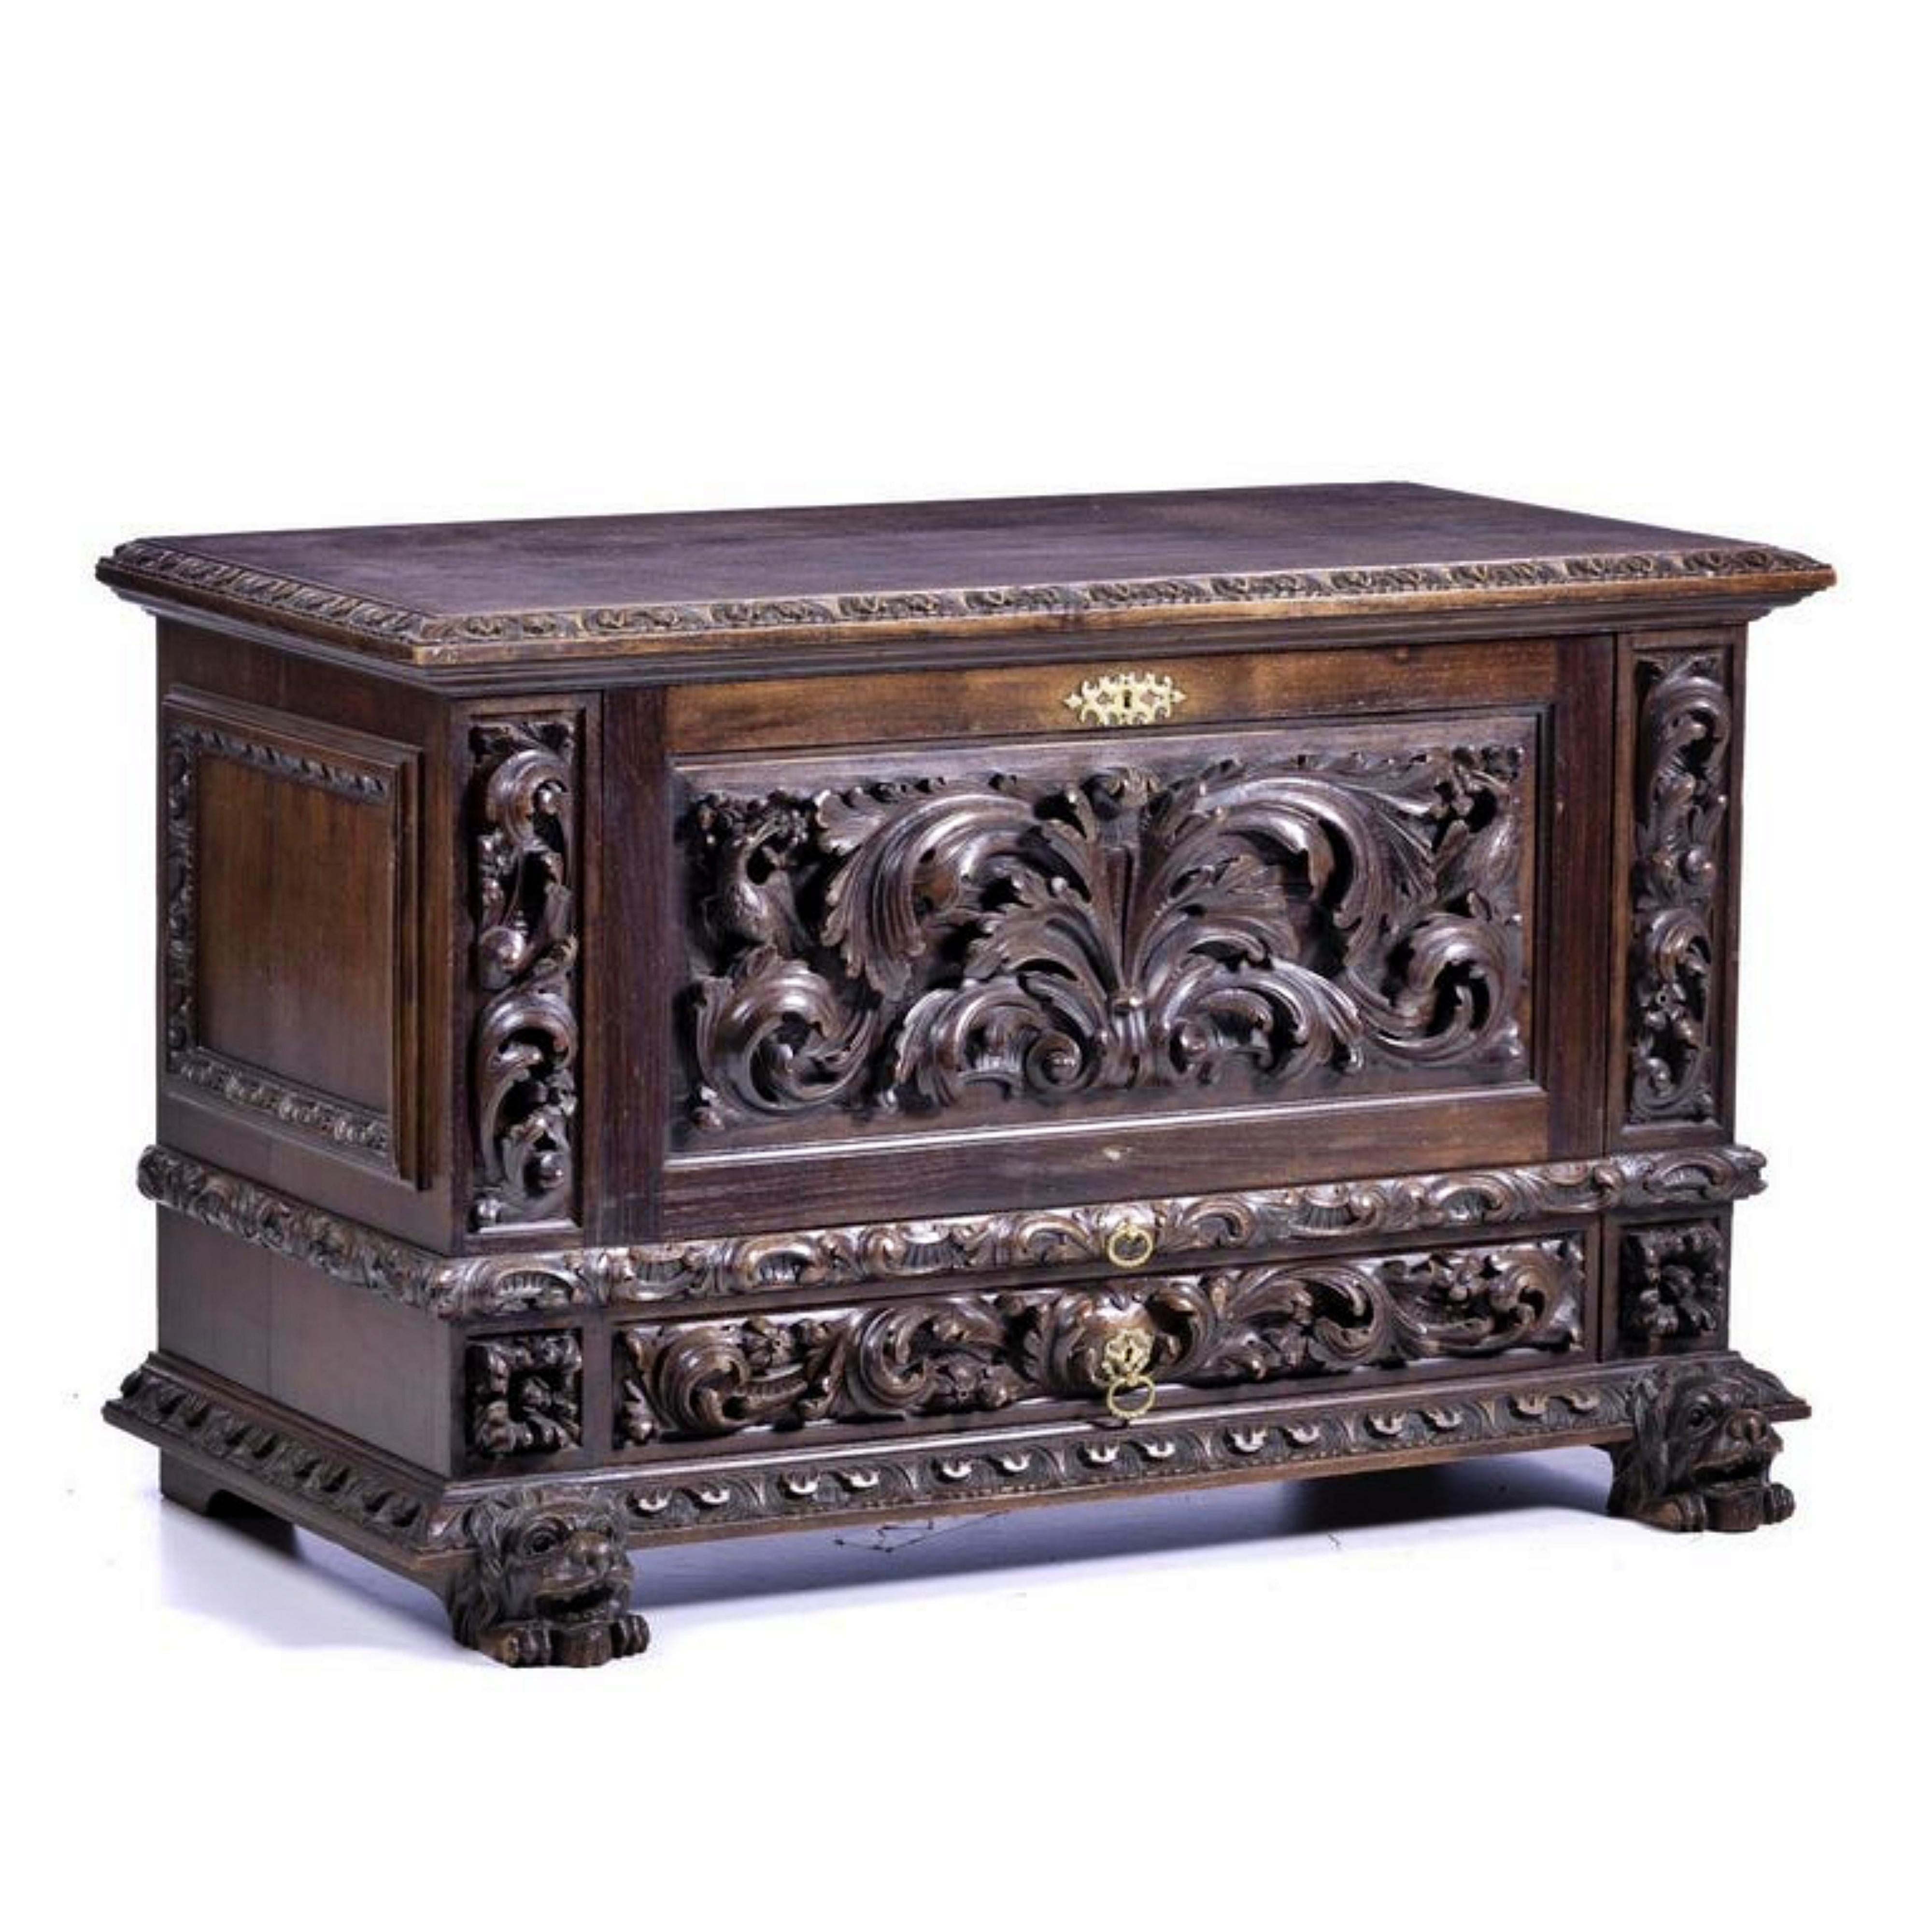 Portuguese Ark
of the 19th century, in carved brown, decorated with plant motifs, feet with zoomorphic shape. 
Signs of use. 
Dim.: 73 x 119 x 57 cm.
Very good condition.